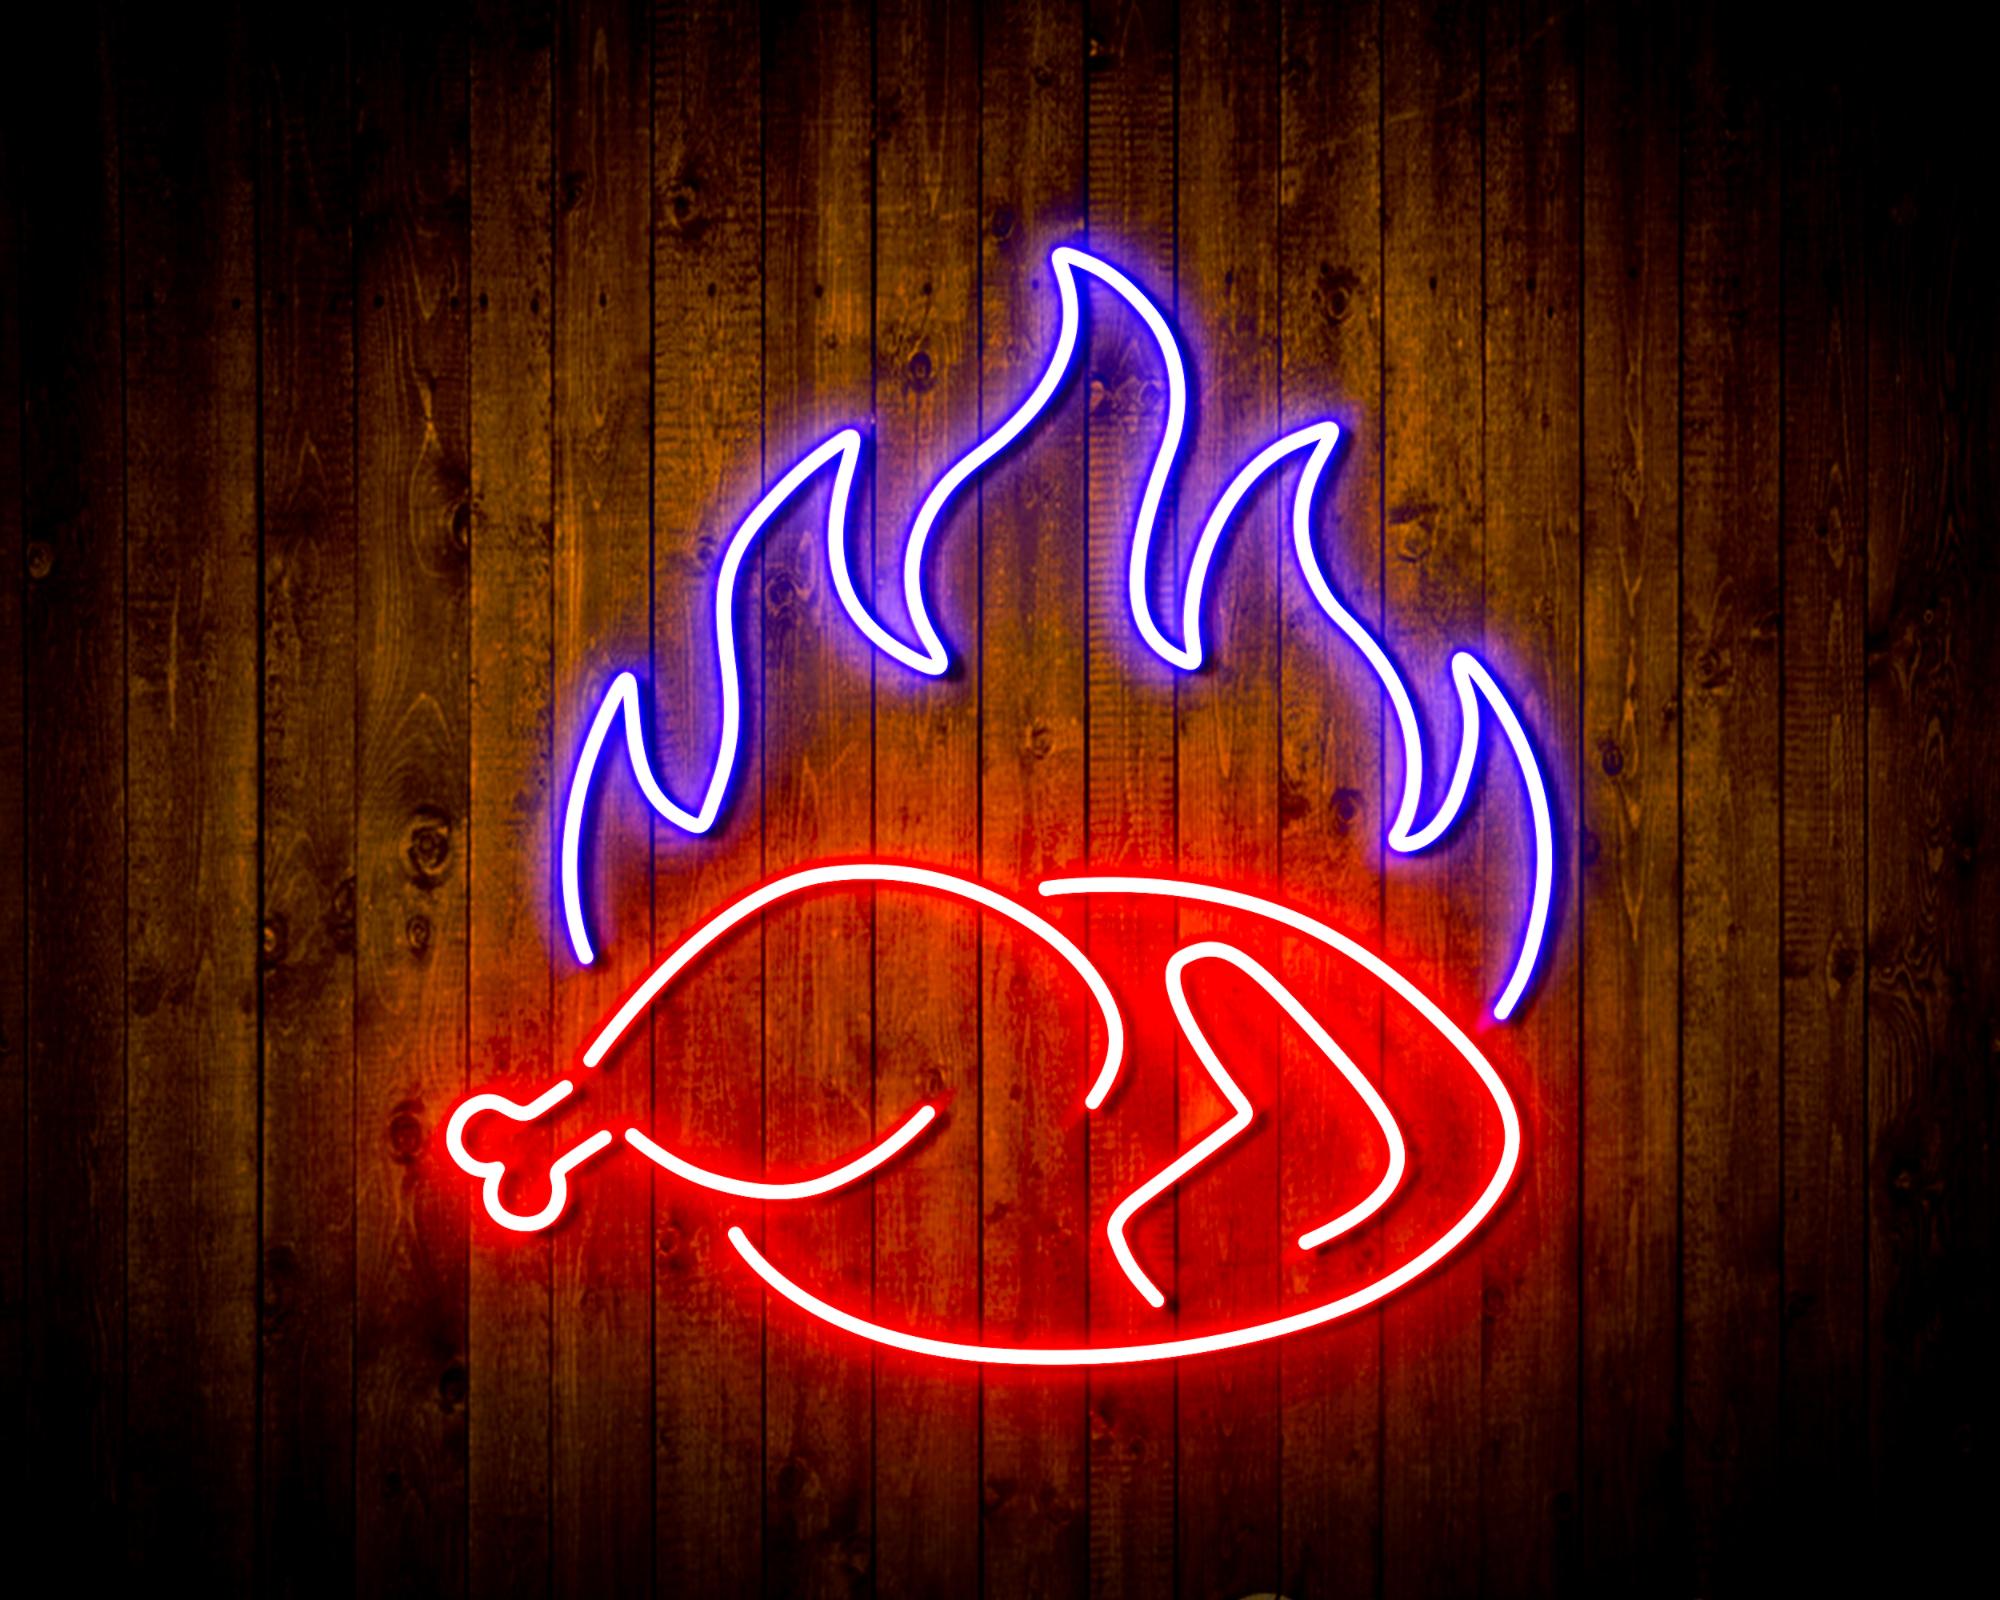 Chicken Shop Restaurant with Flame LED Neon Sign Wall Light